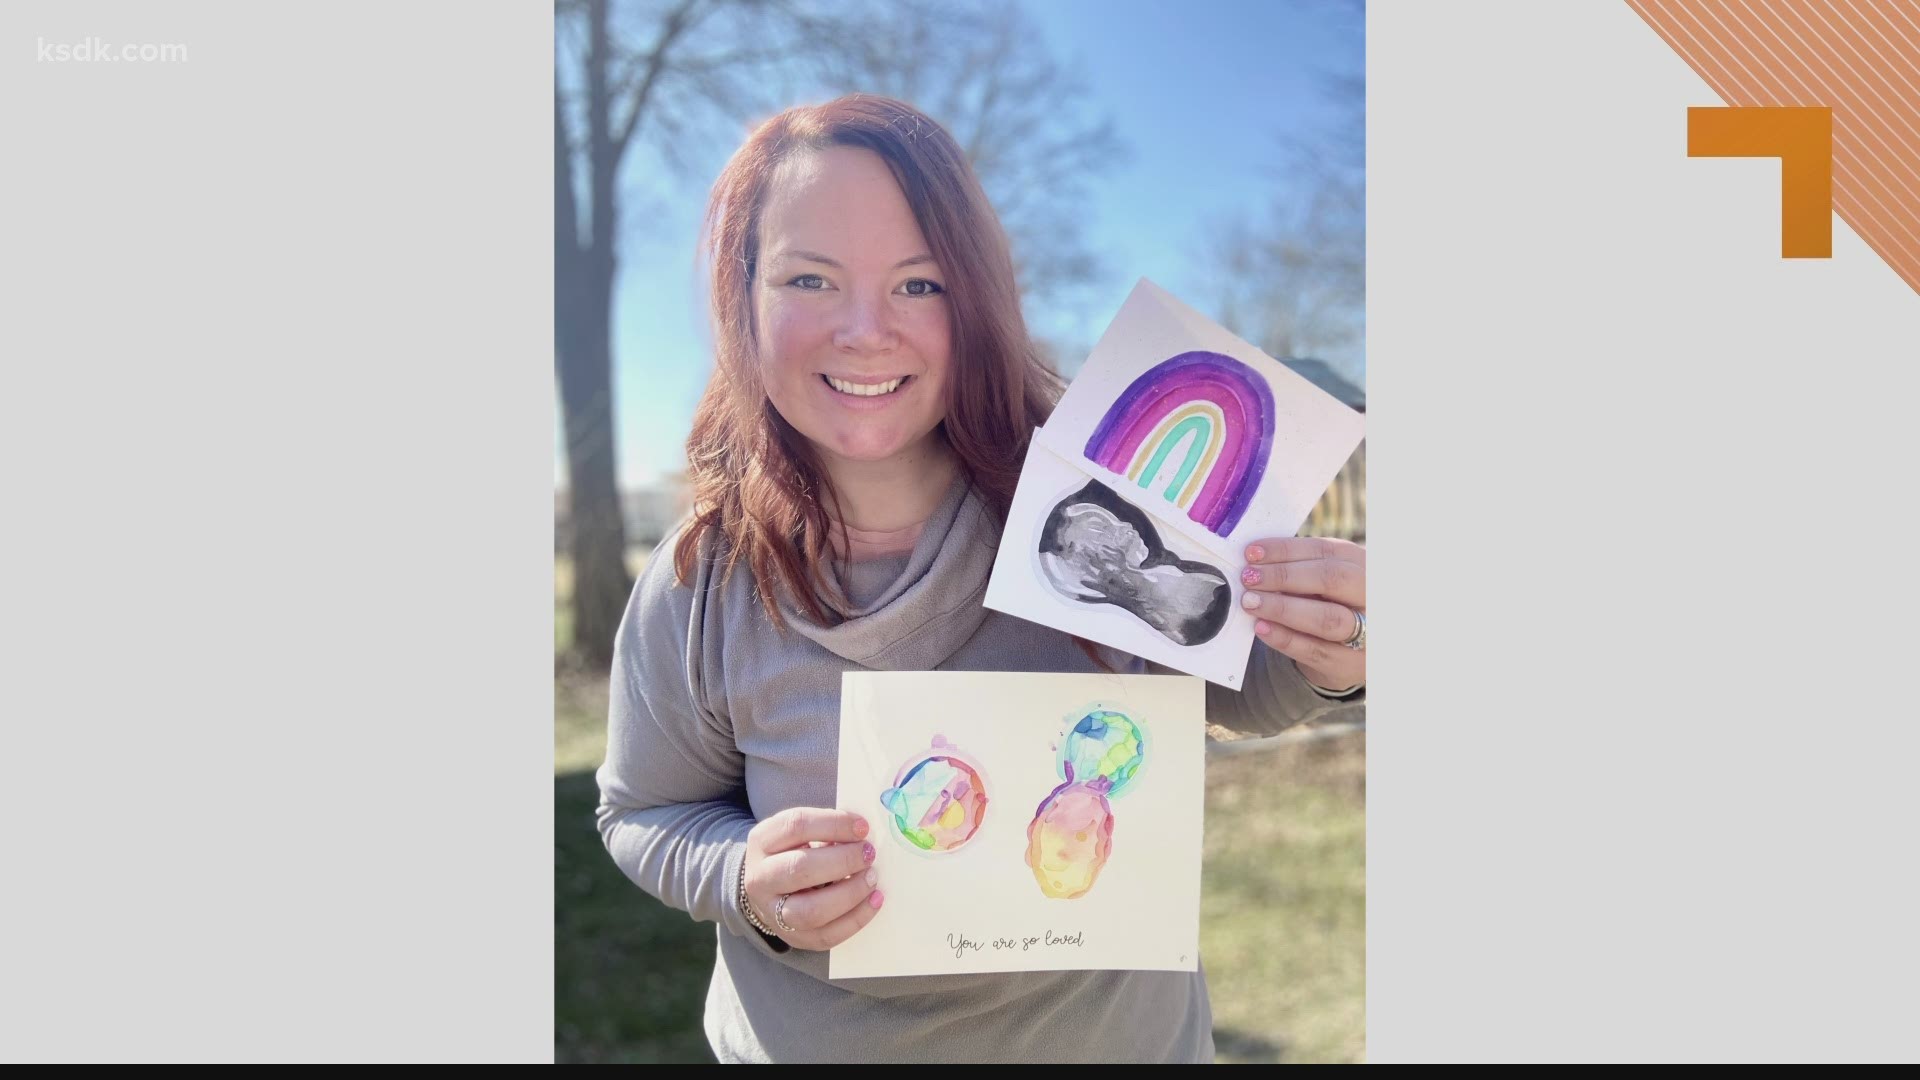 Roxy Jenkins began painting embryos after her own struggles with infertility.